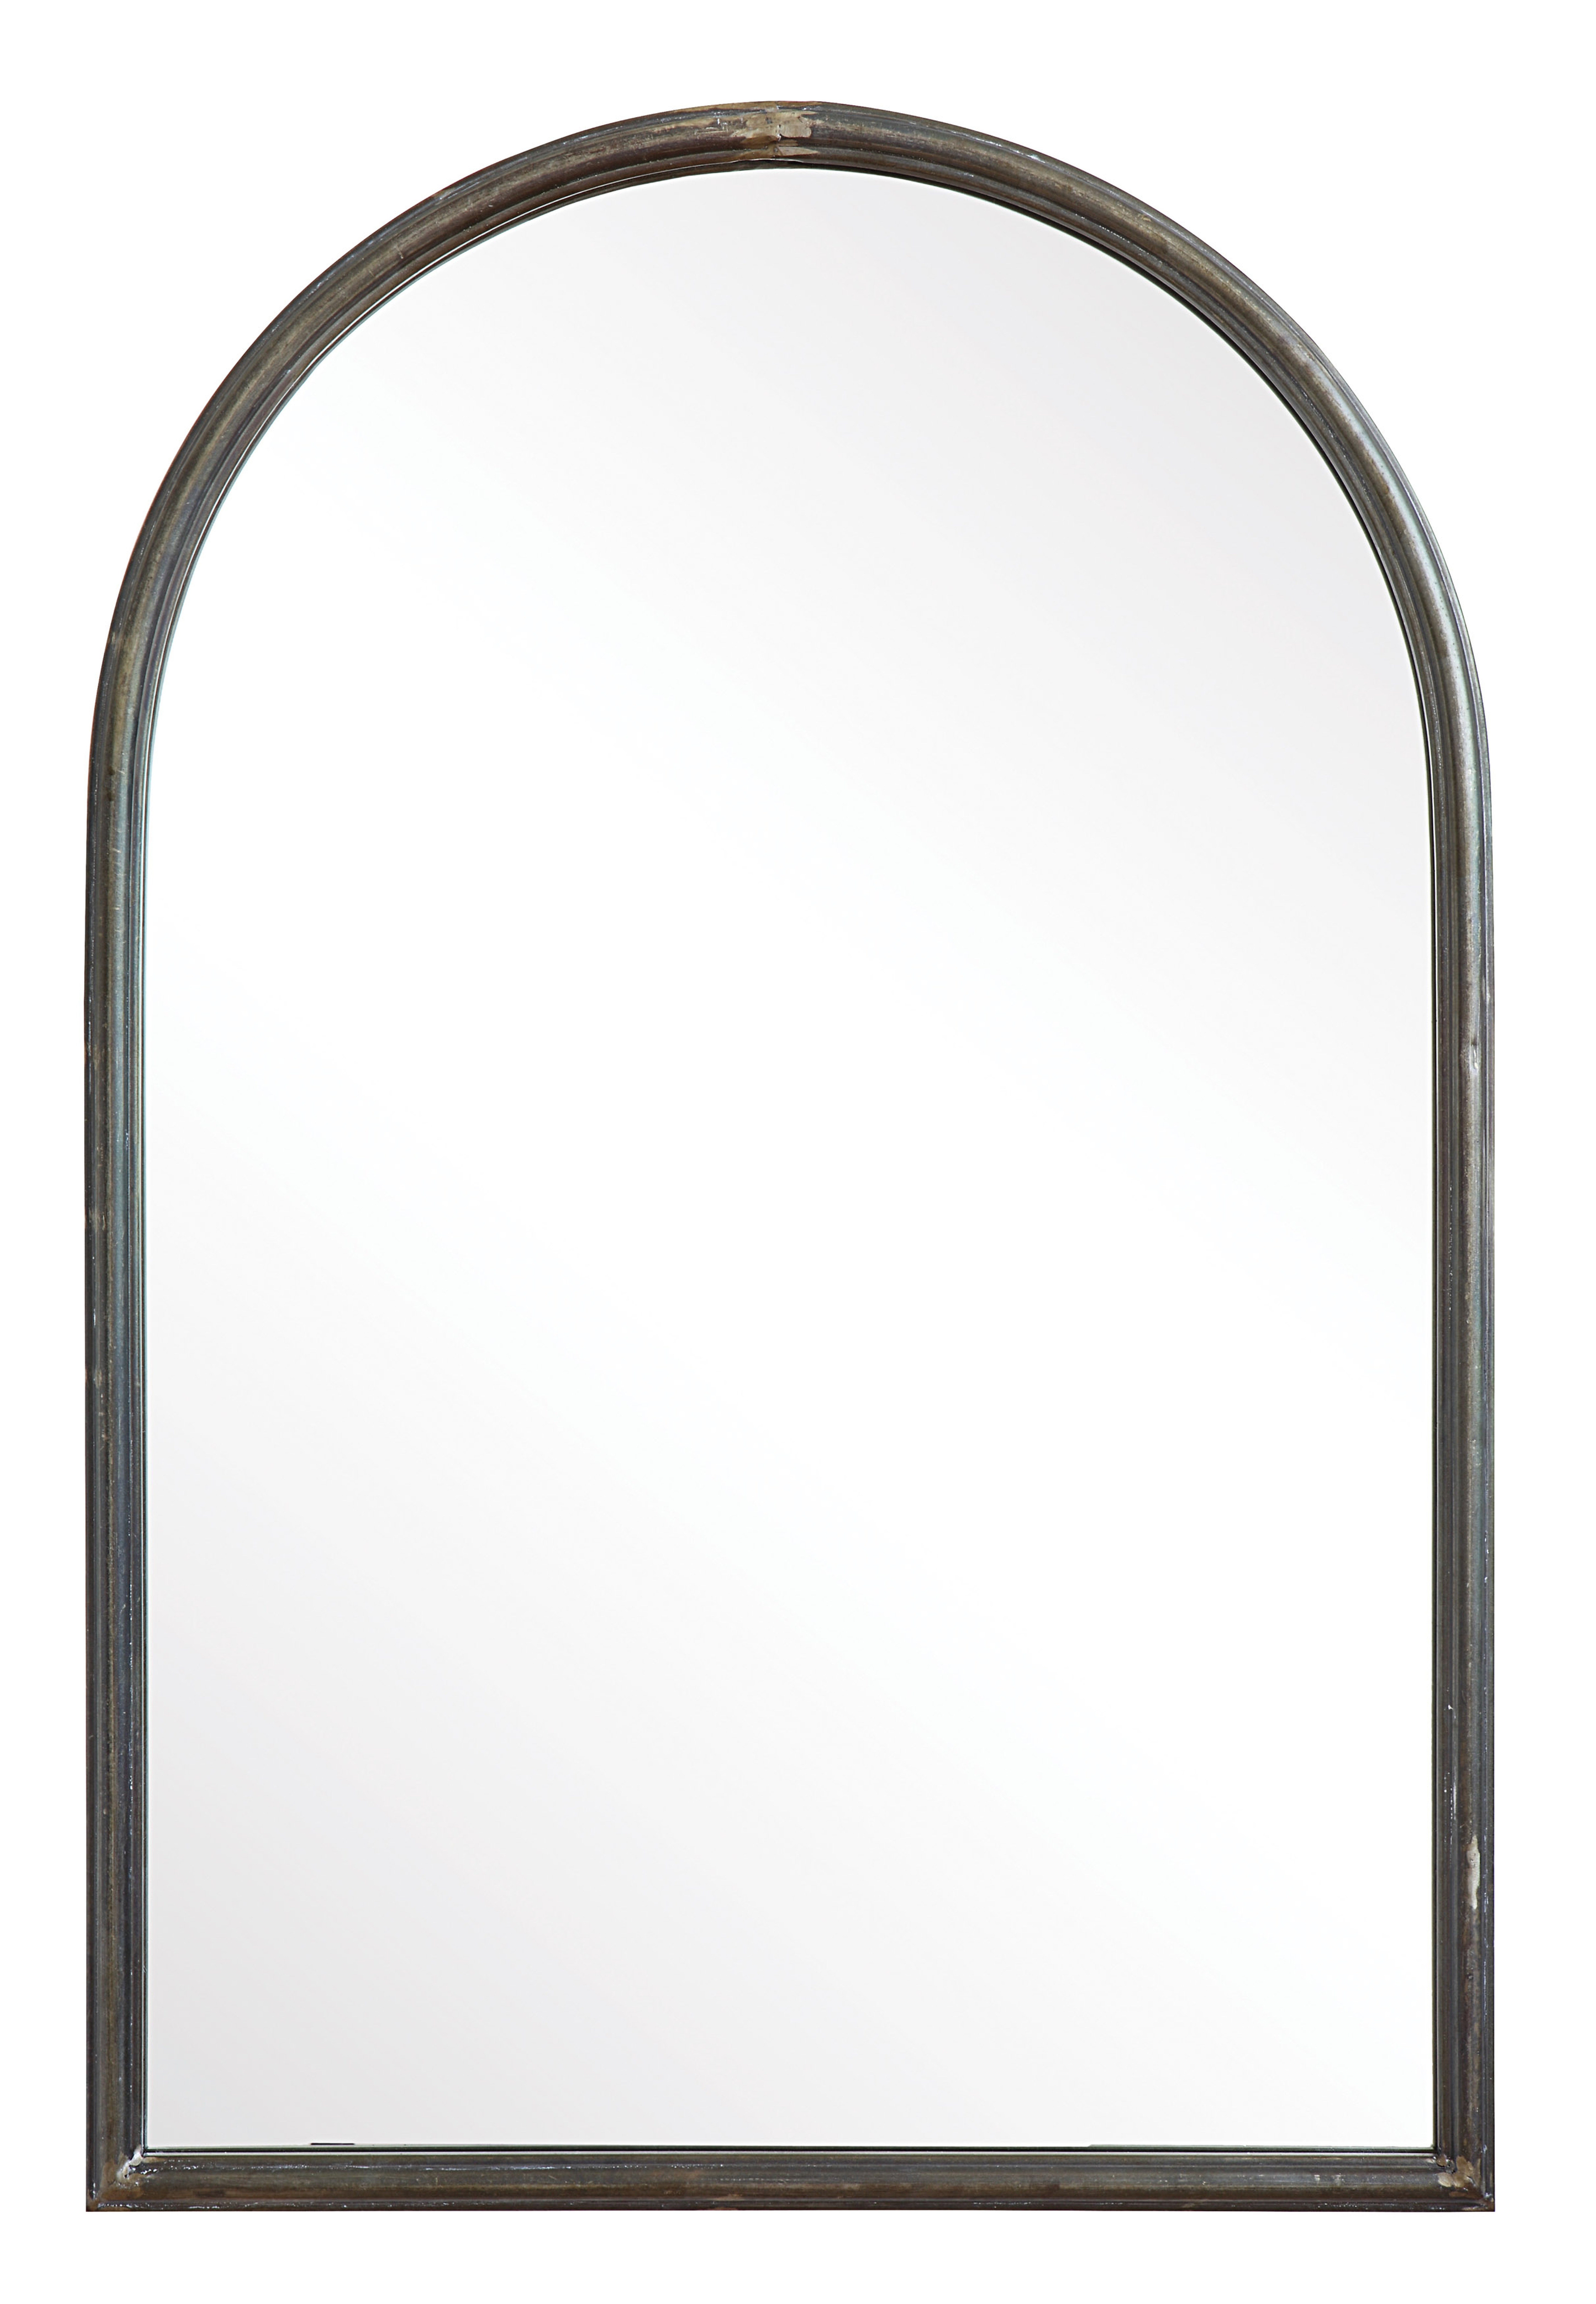 Arched Mirror with Metal Trim, Black, 36" - Nomad Home